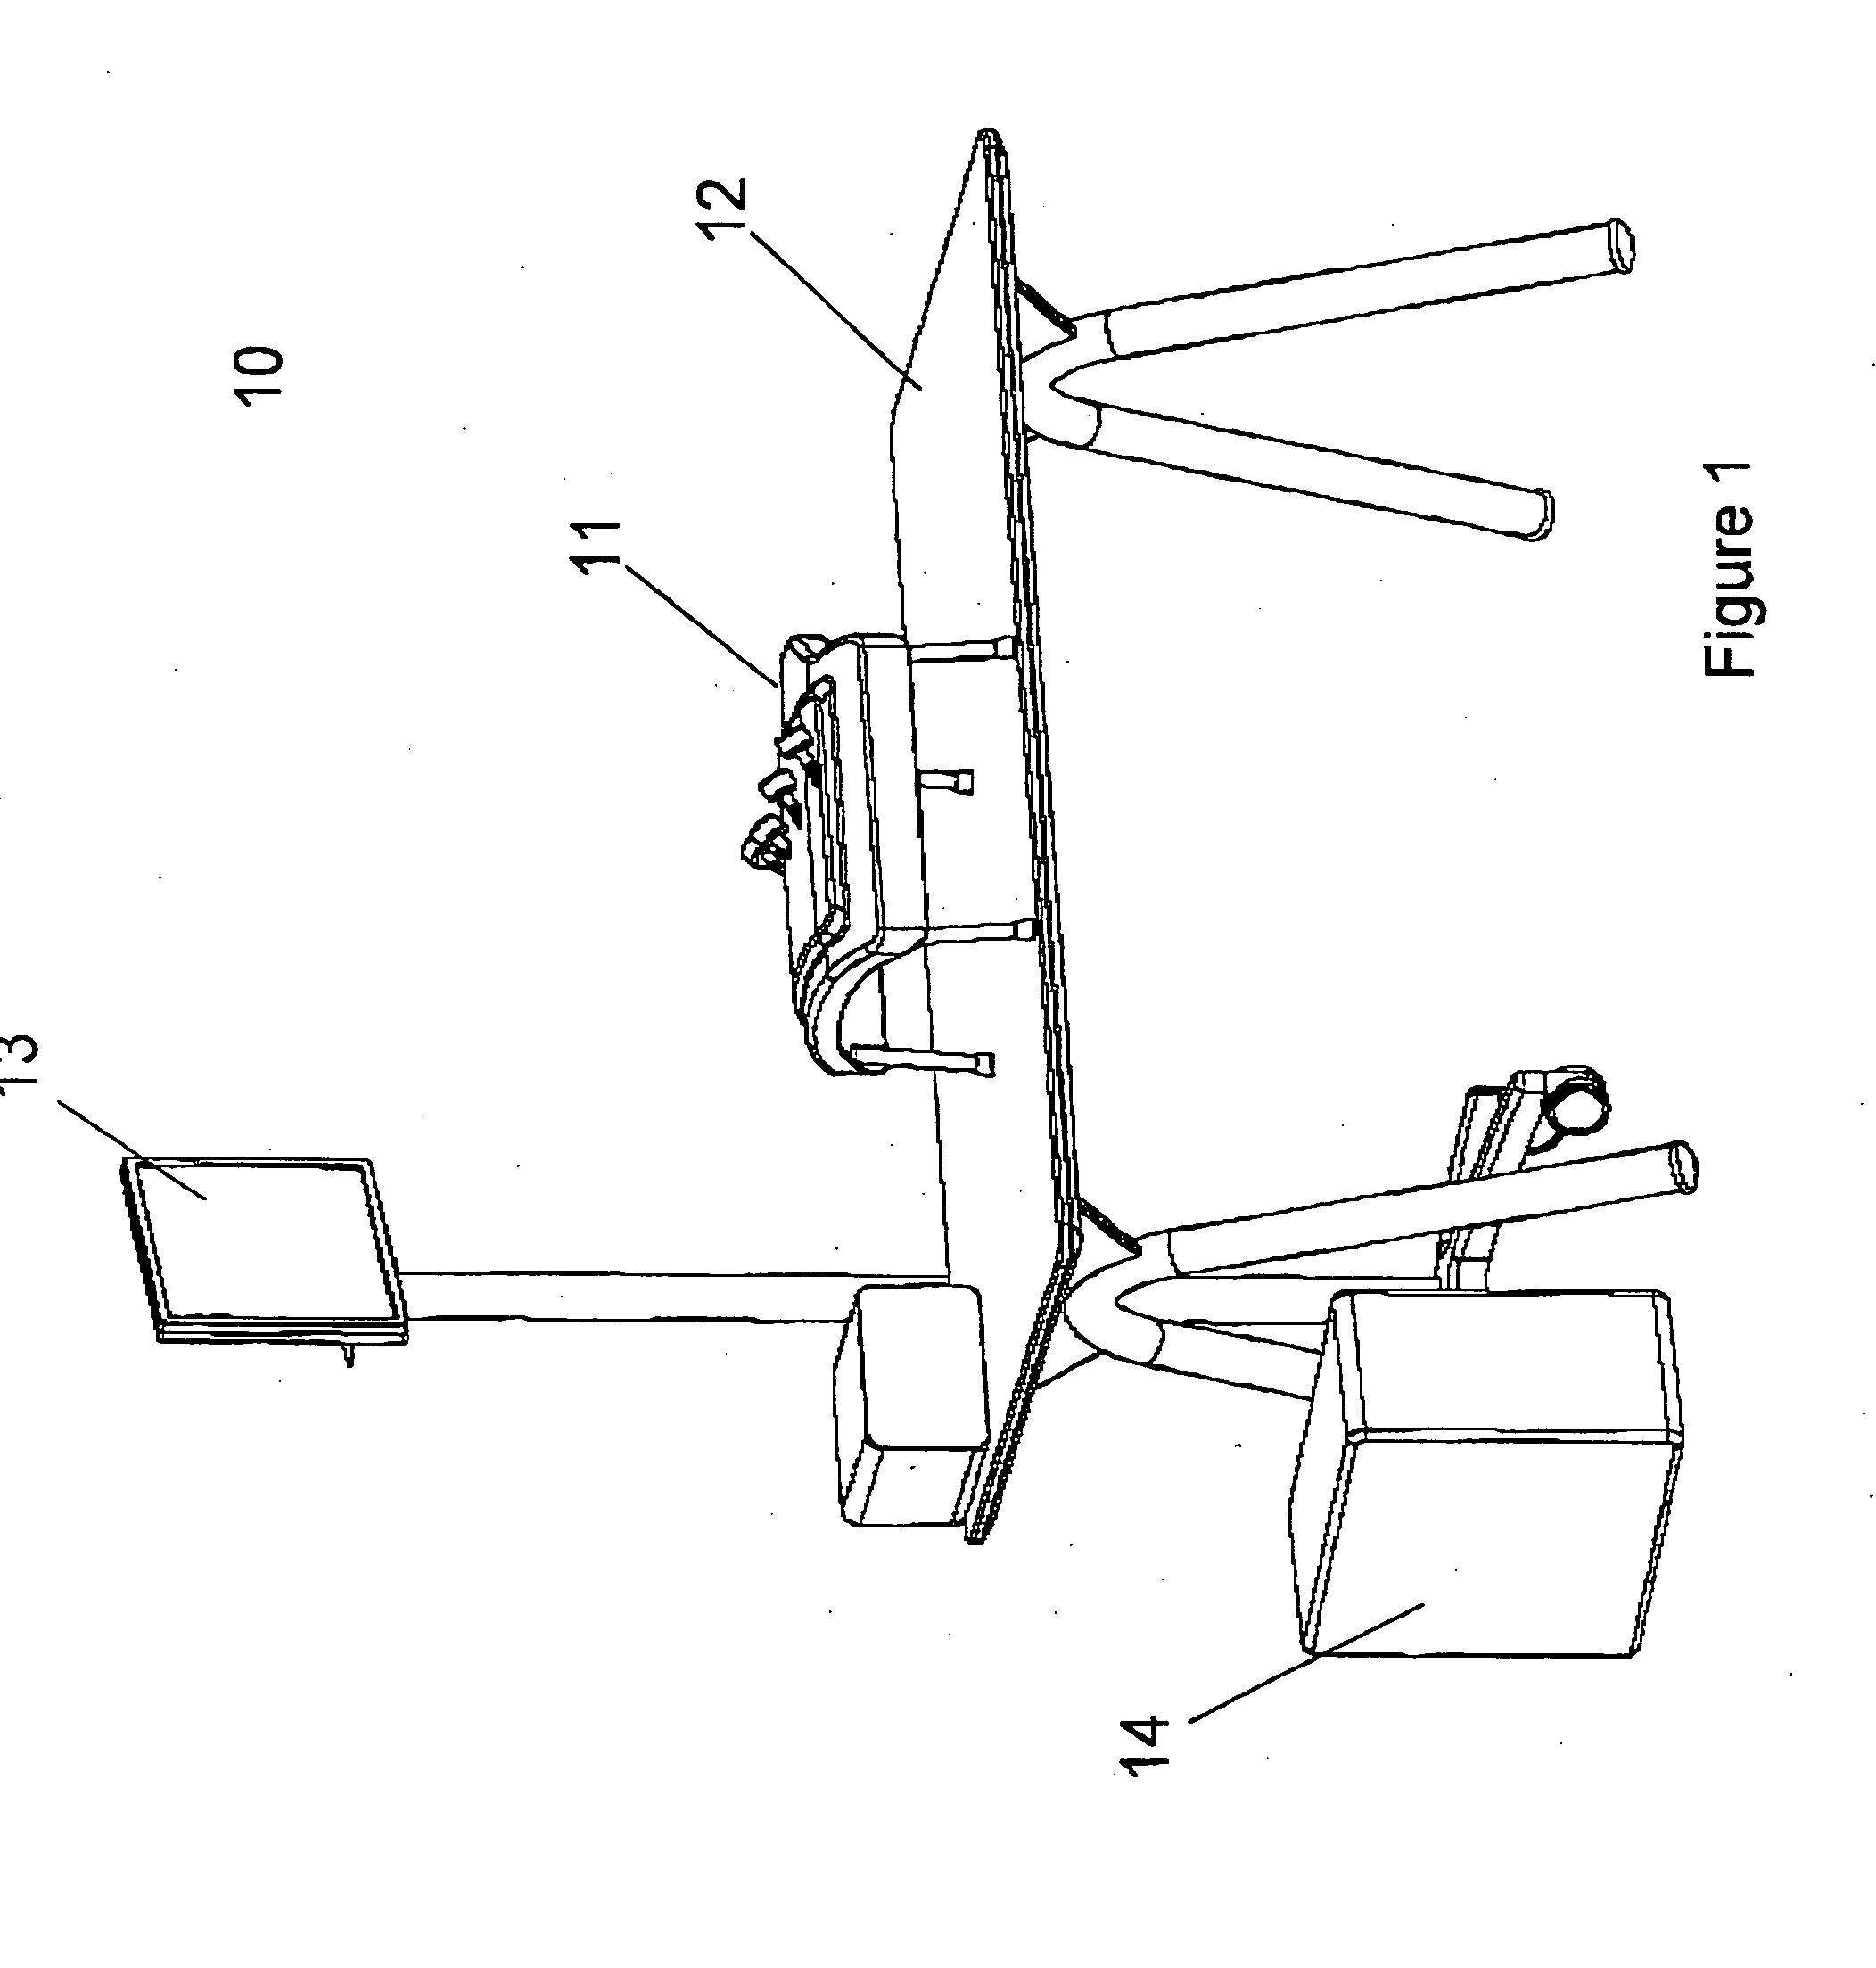 Kit, operating element and haptic device for use in surgical simulation systems